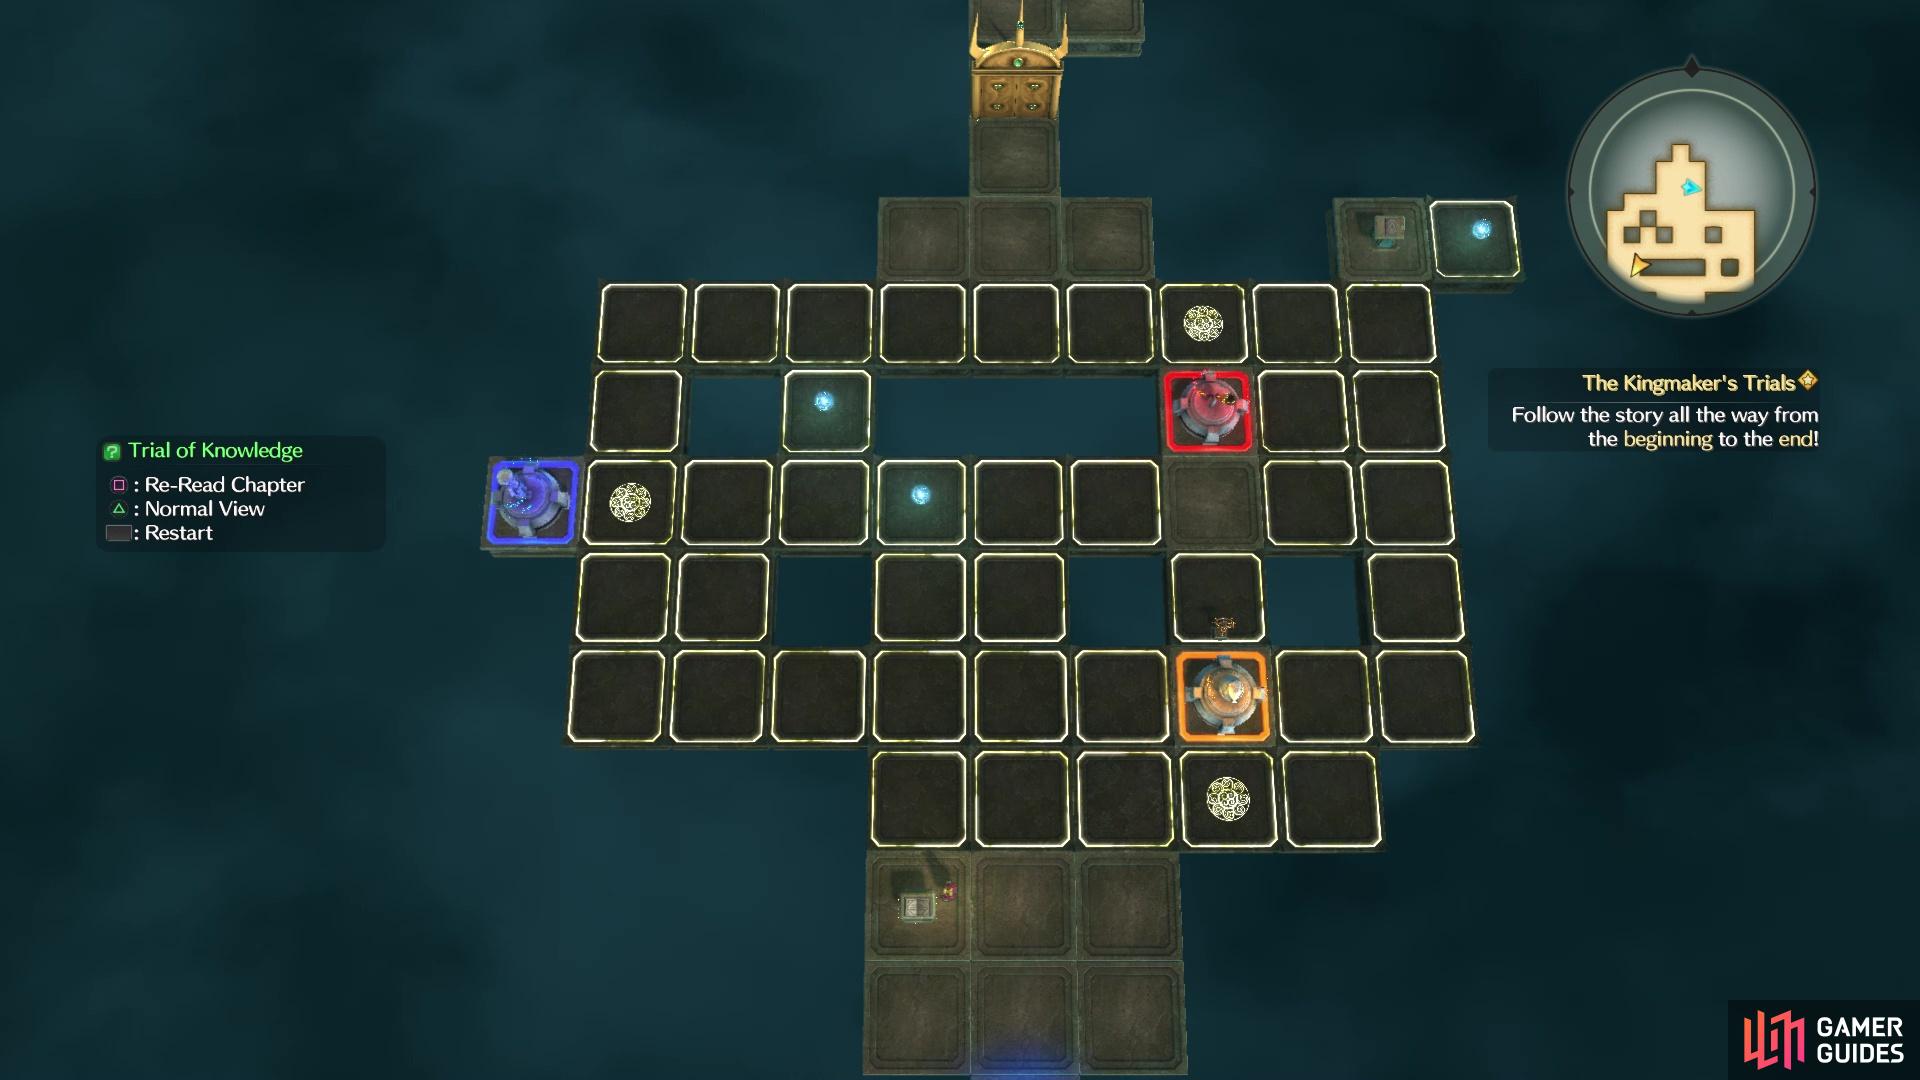 Get a bird's eye view of the puzzle with the Triangle button